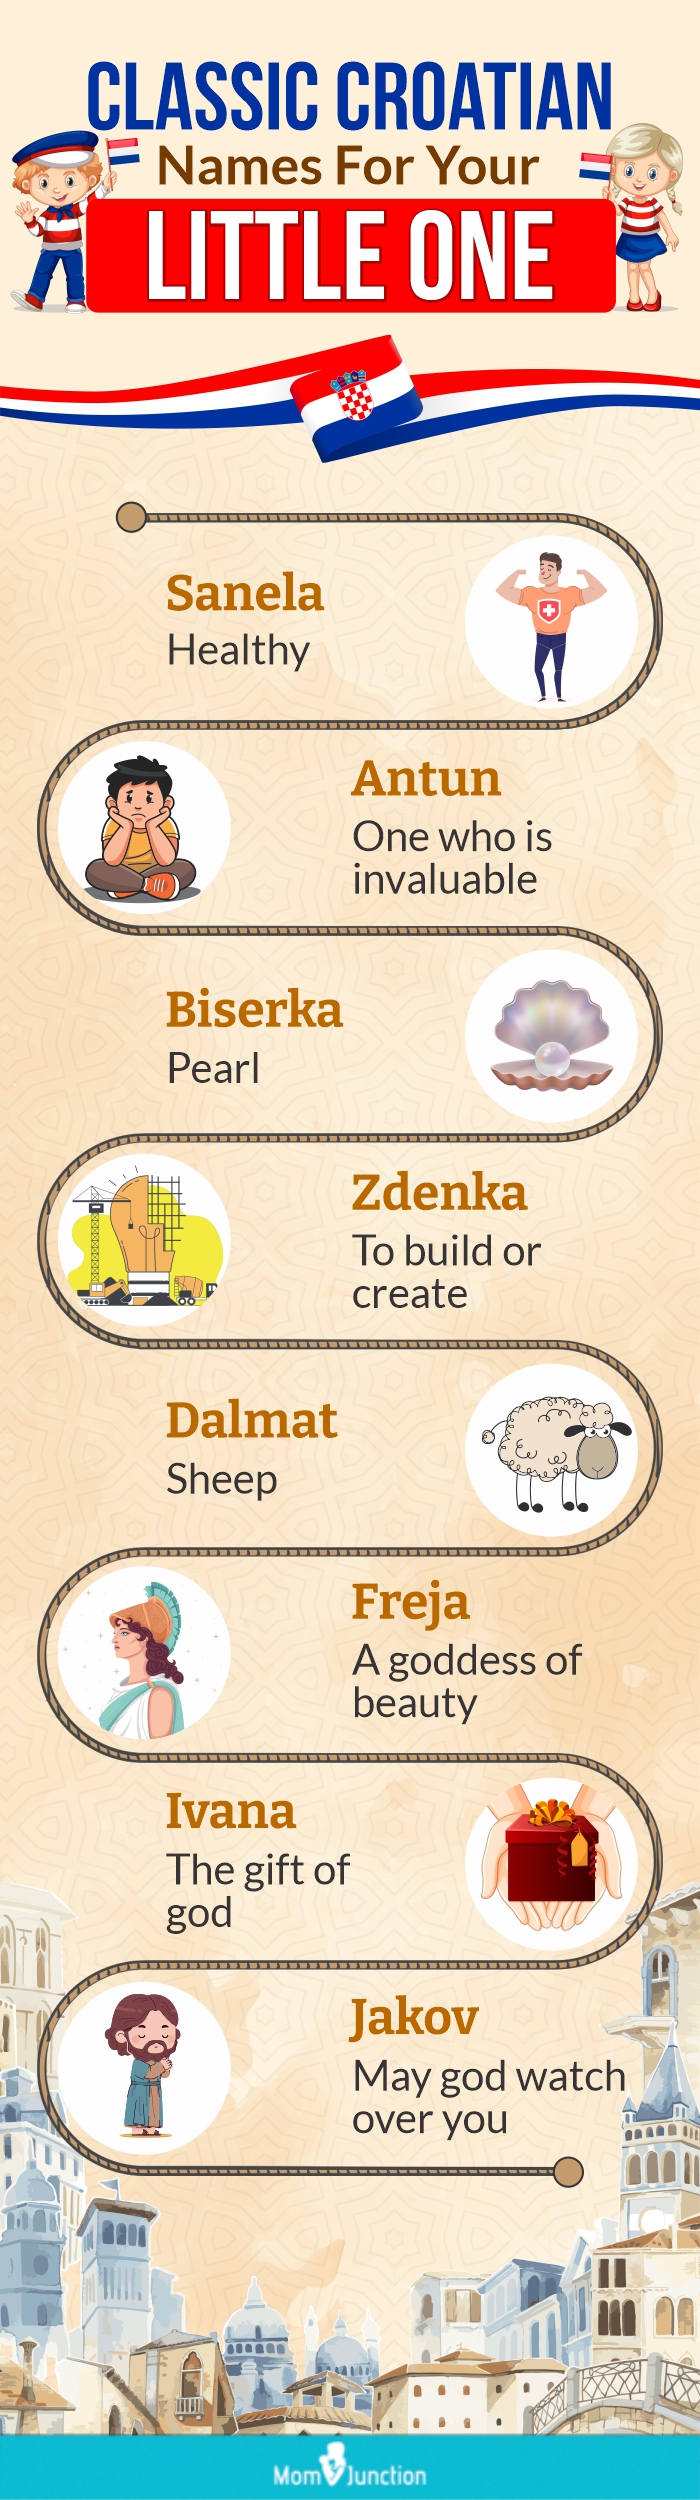 classic croatian names for your little one (infographic)